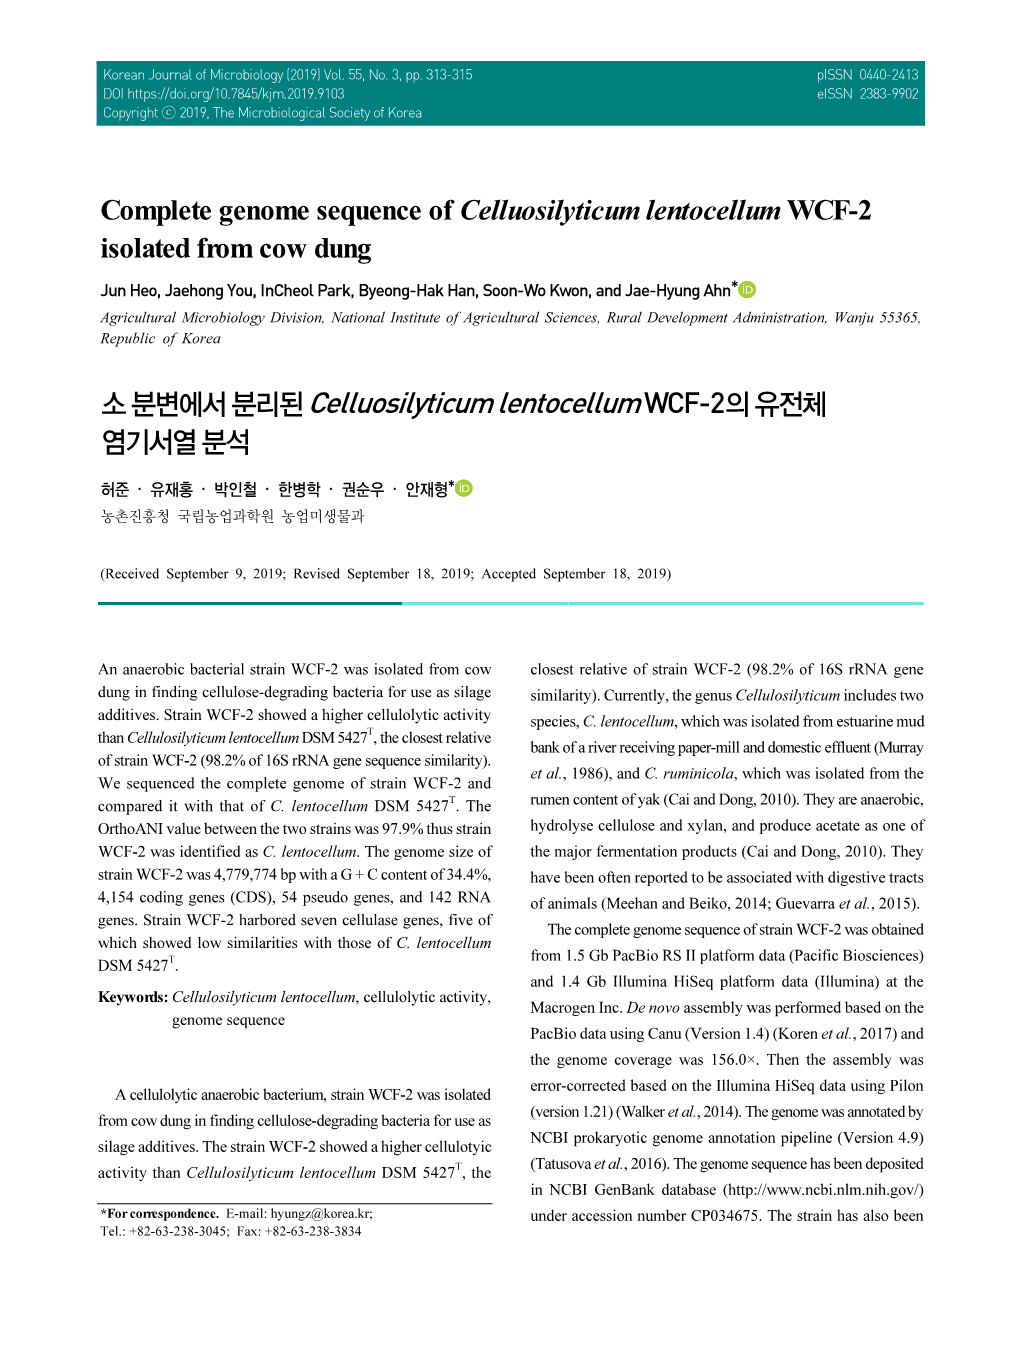 Complete Genome Sequence of Celluosilyticum Lentocellum WCF-2 Isolated from Cow Dung